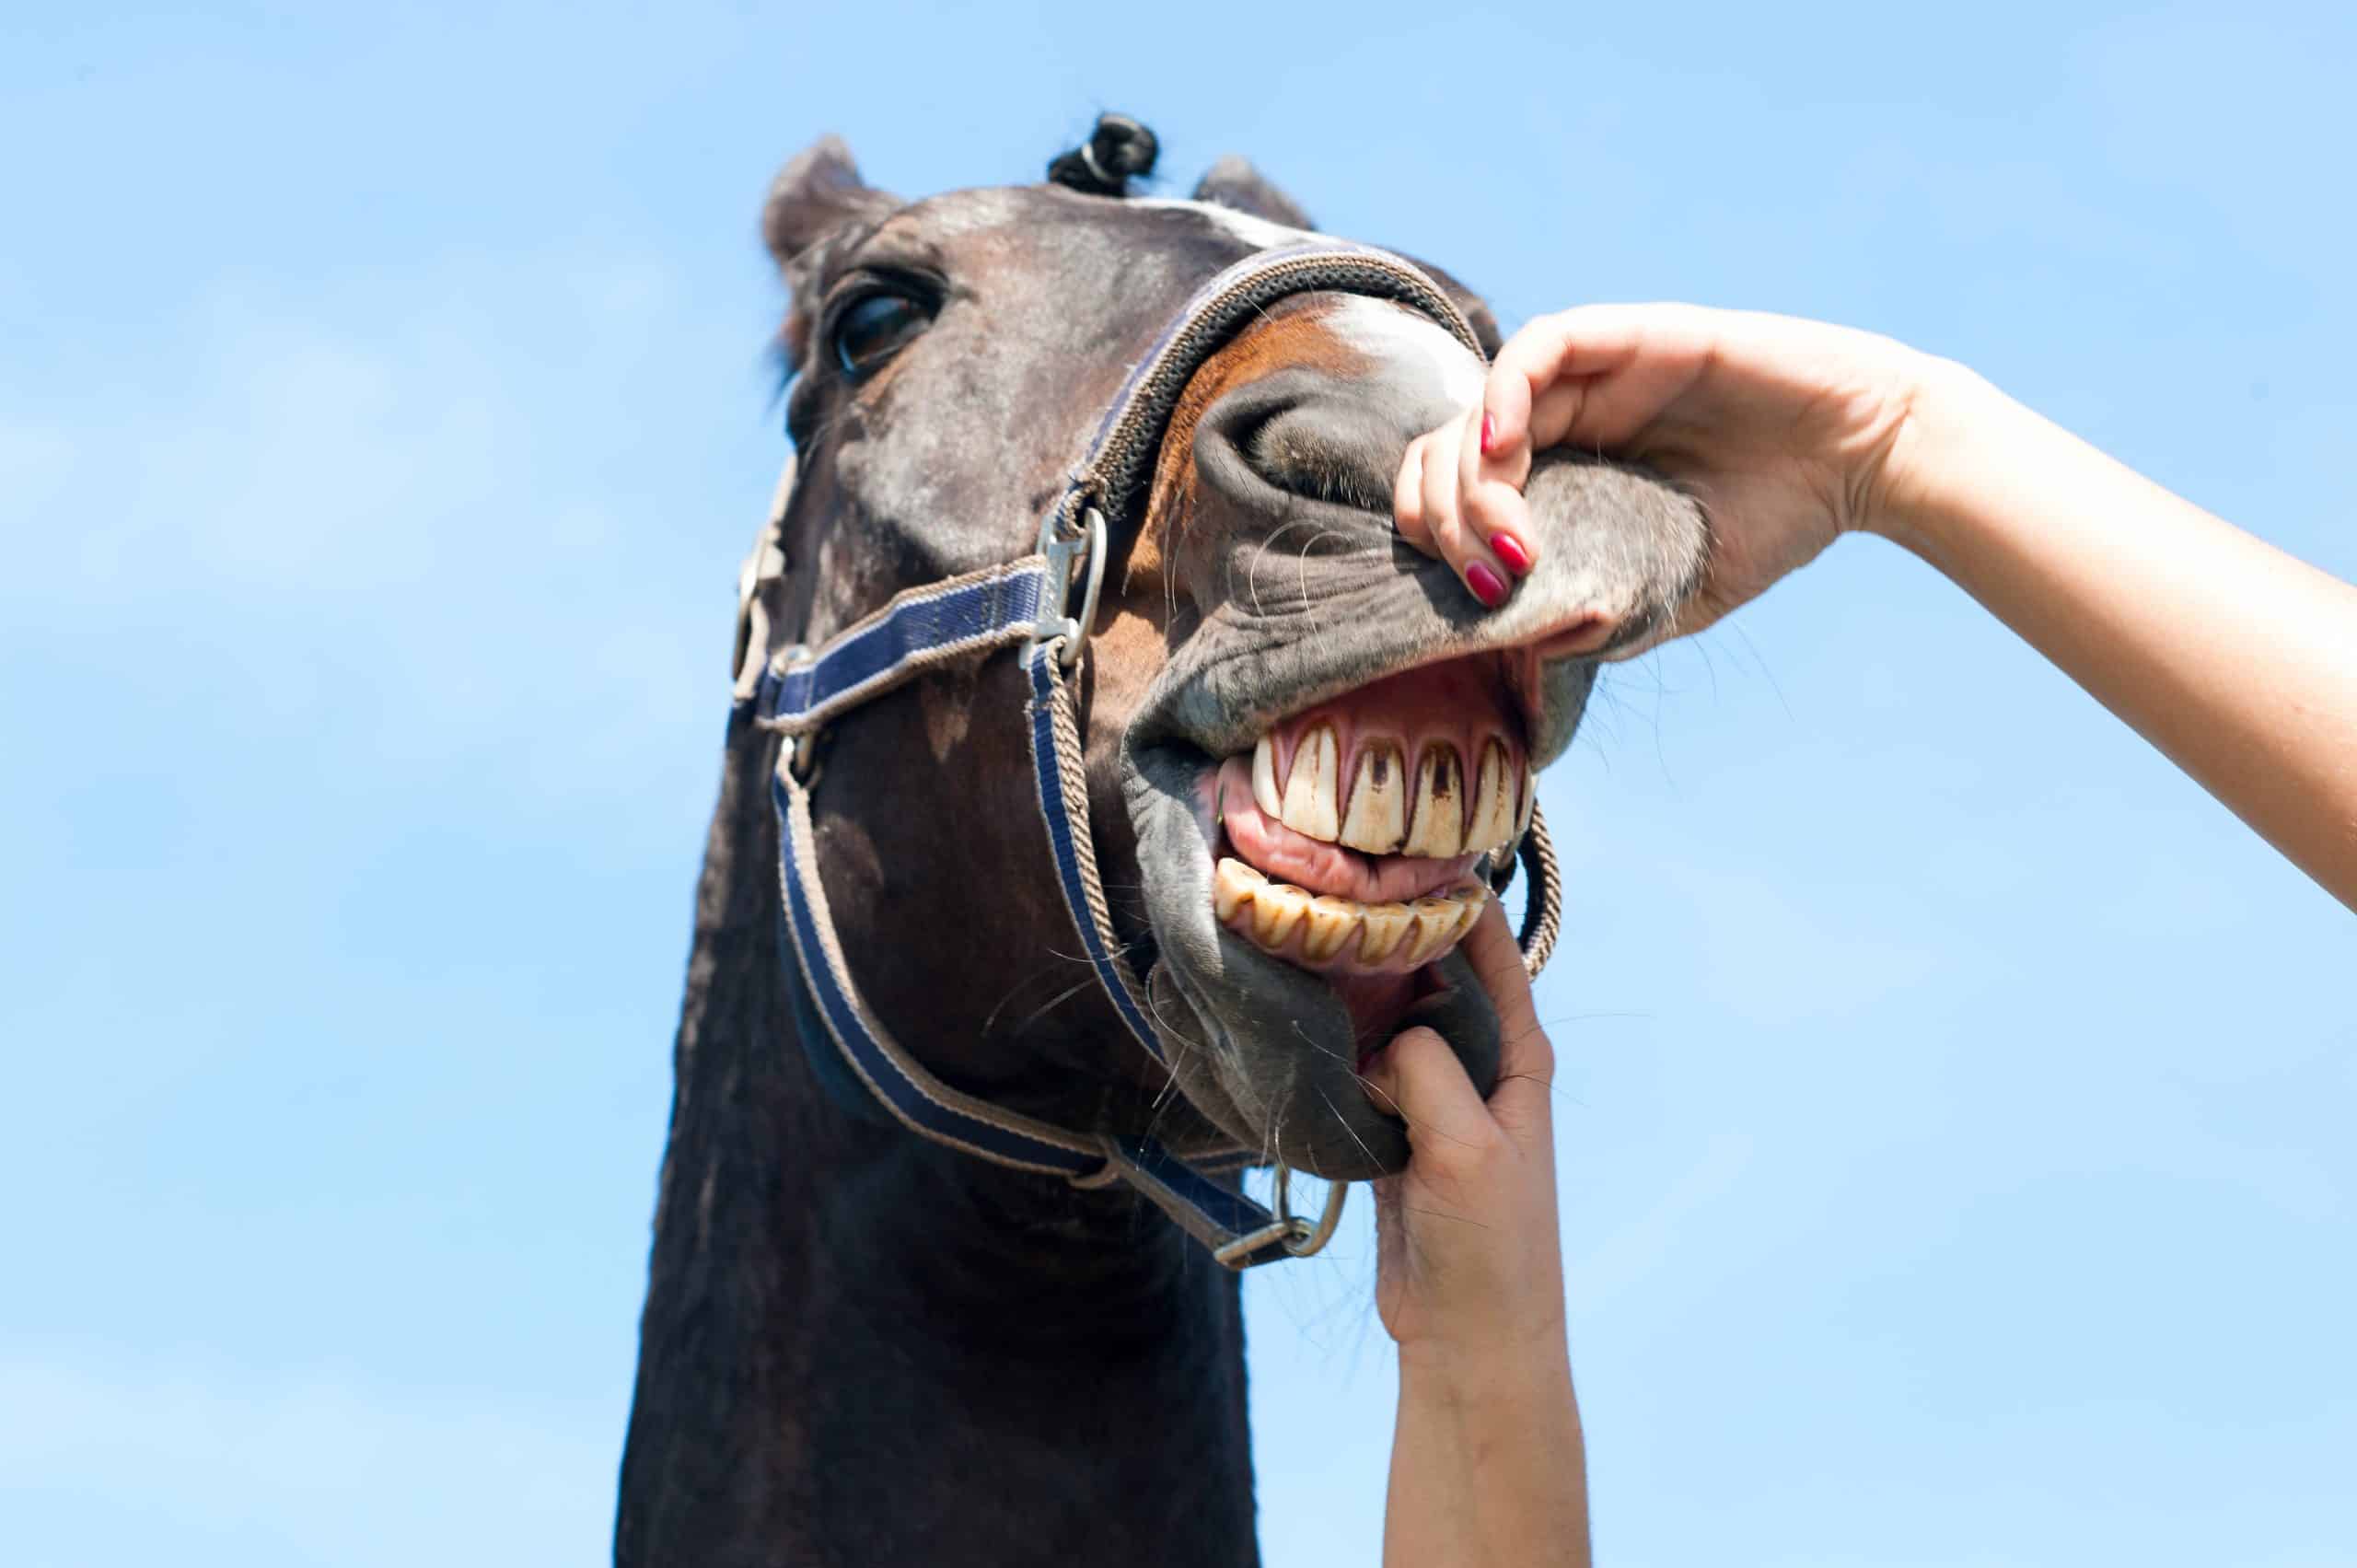 long in the tooth origin is from horses